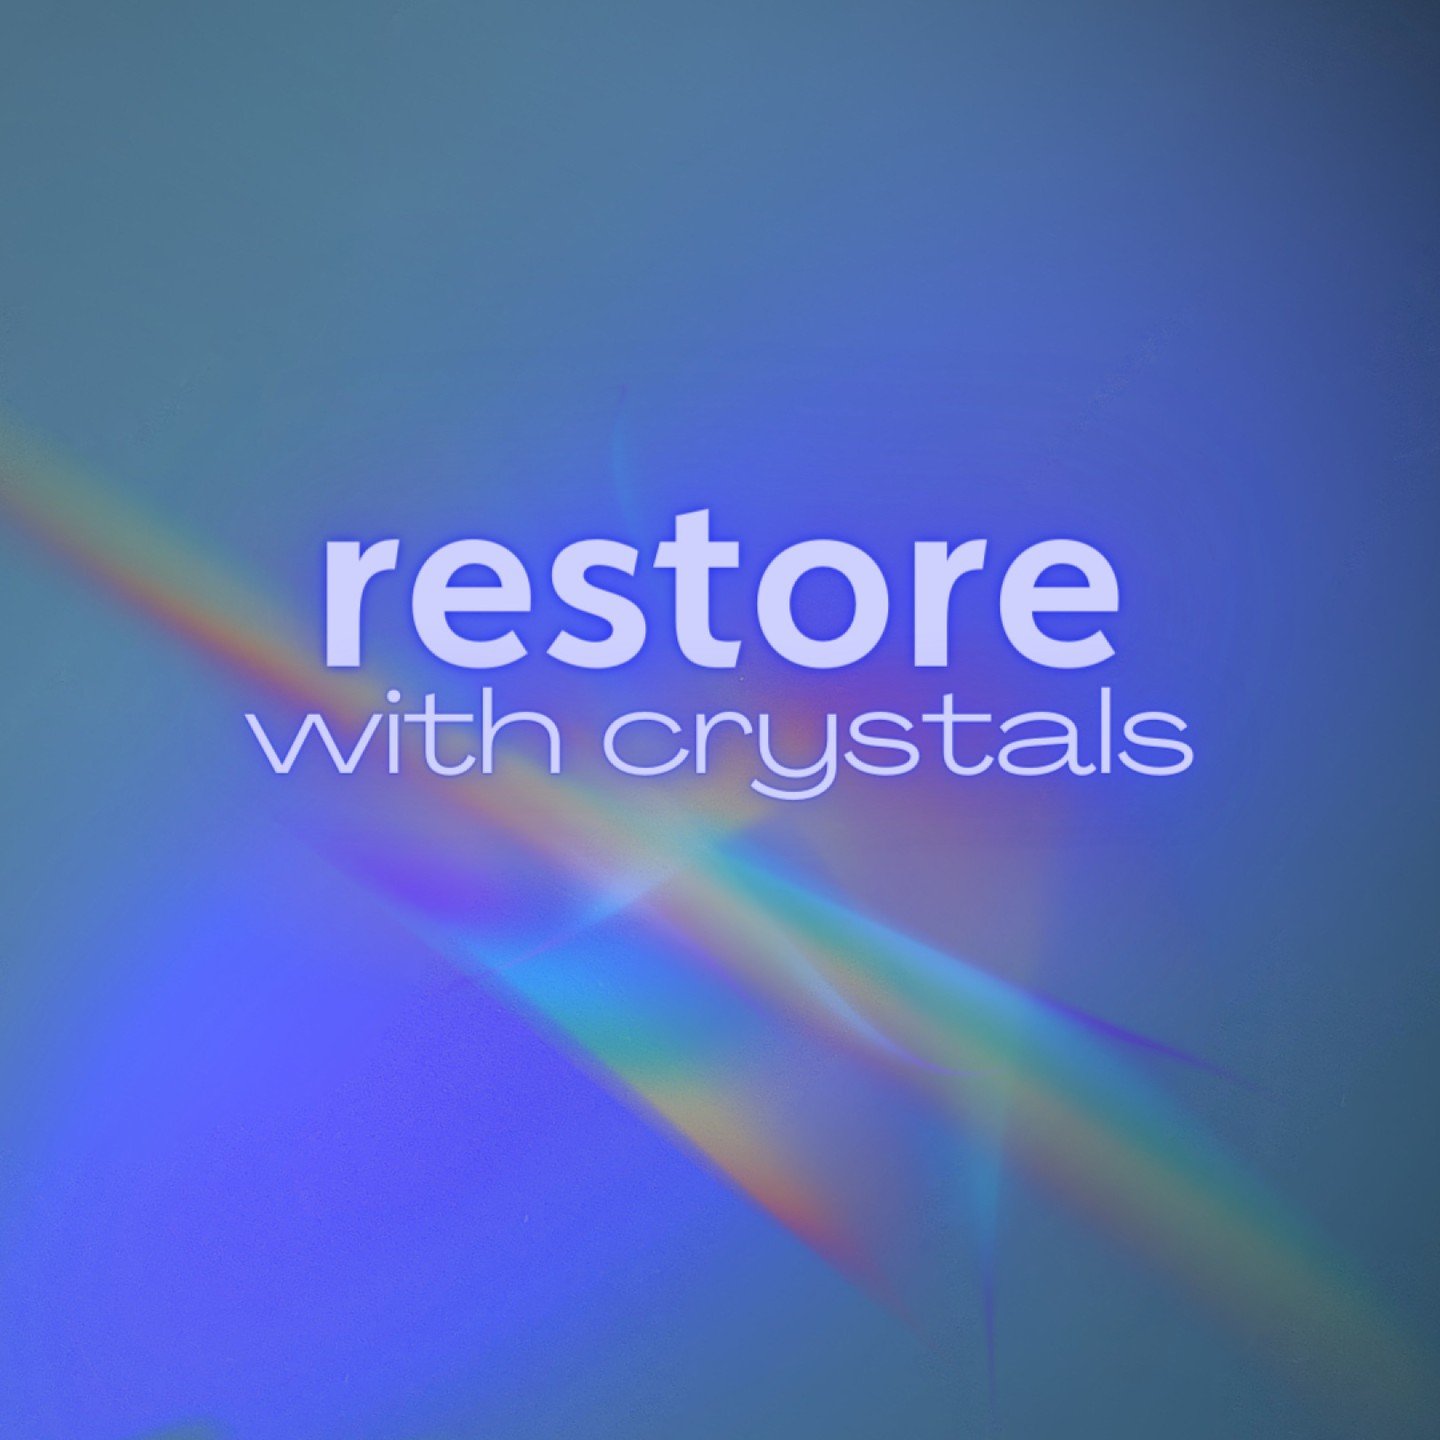 Restore with Crystals at Little Lotus Yoga in Cheyenne!

Join Rachelle Barkhurst, RYT 200 - Owner of Cosmic Heart Collective for a Restorative Yoga Practice amplified by the use of crystals.

Learn to work with crystals and set an intention with the 